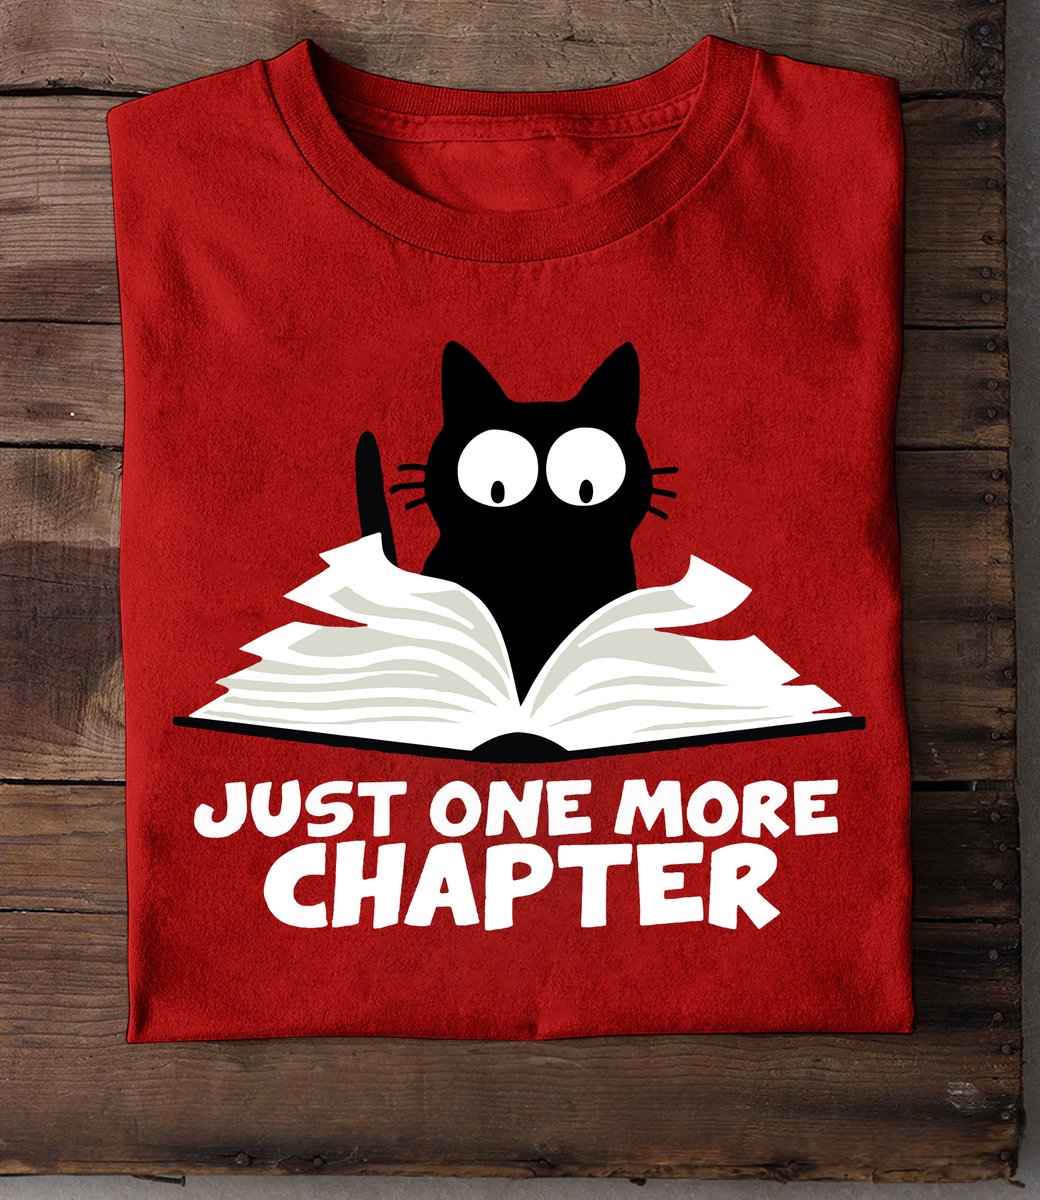 Just One More Chapter. miahdogtags.com/collection/cat… #books #reading #cats